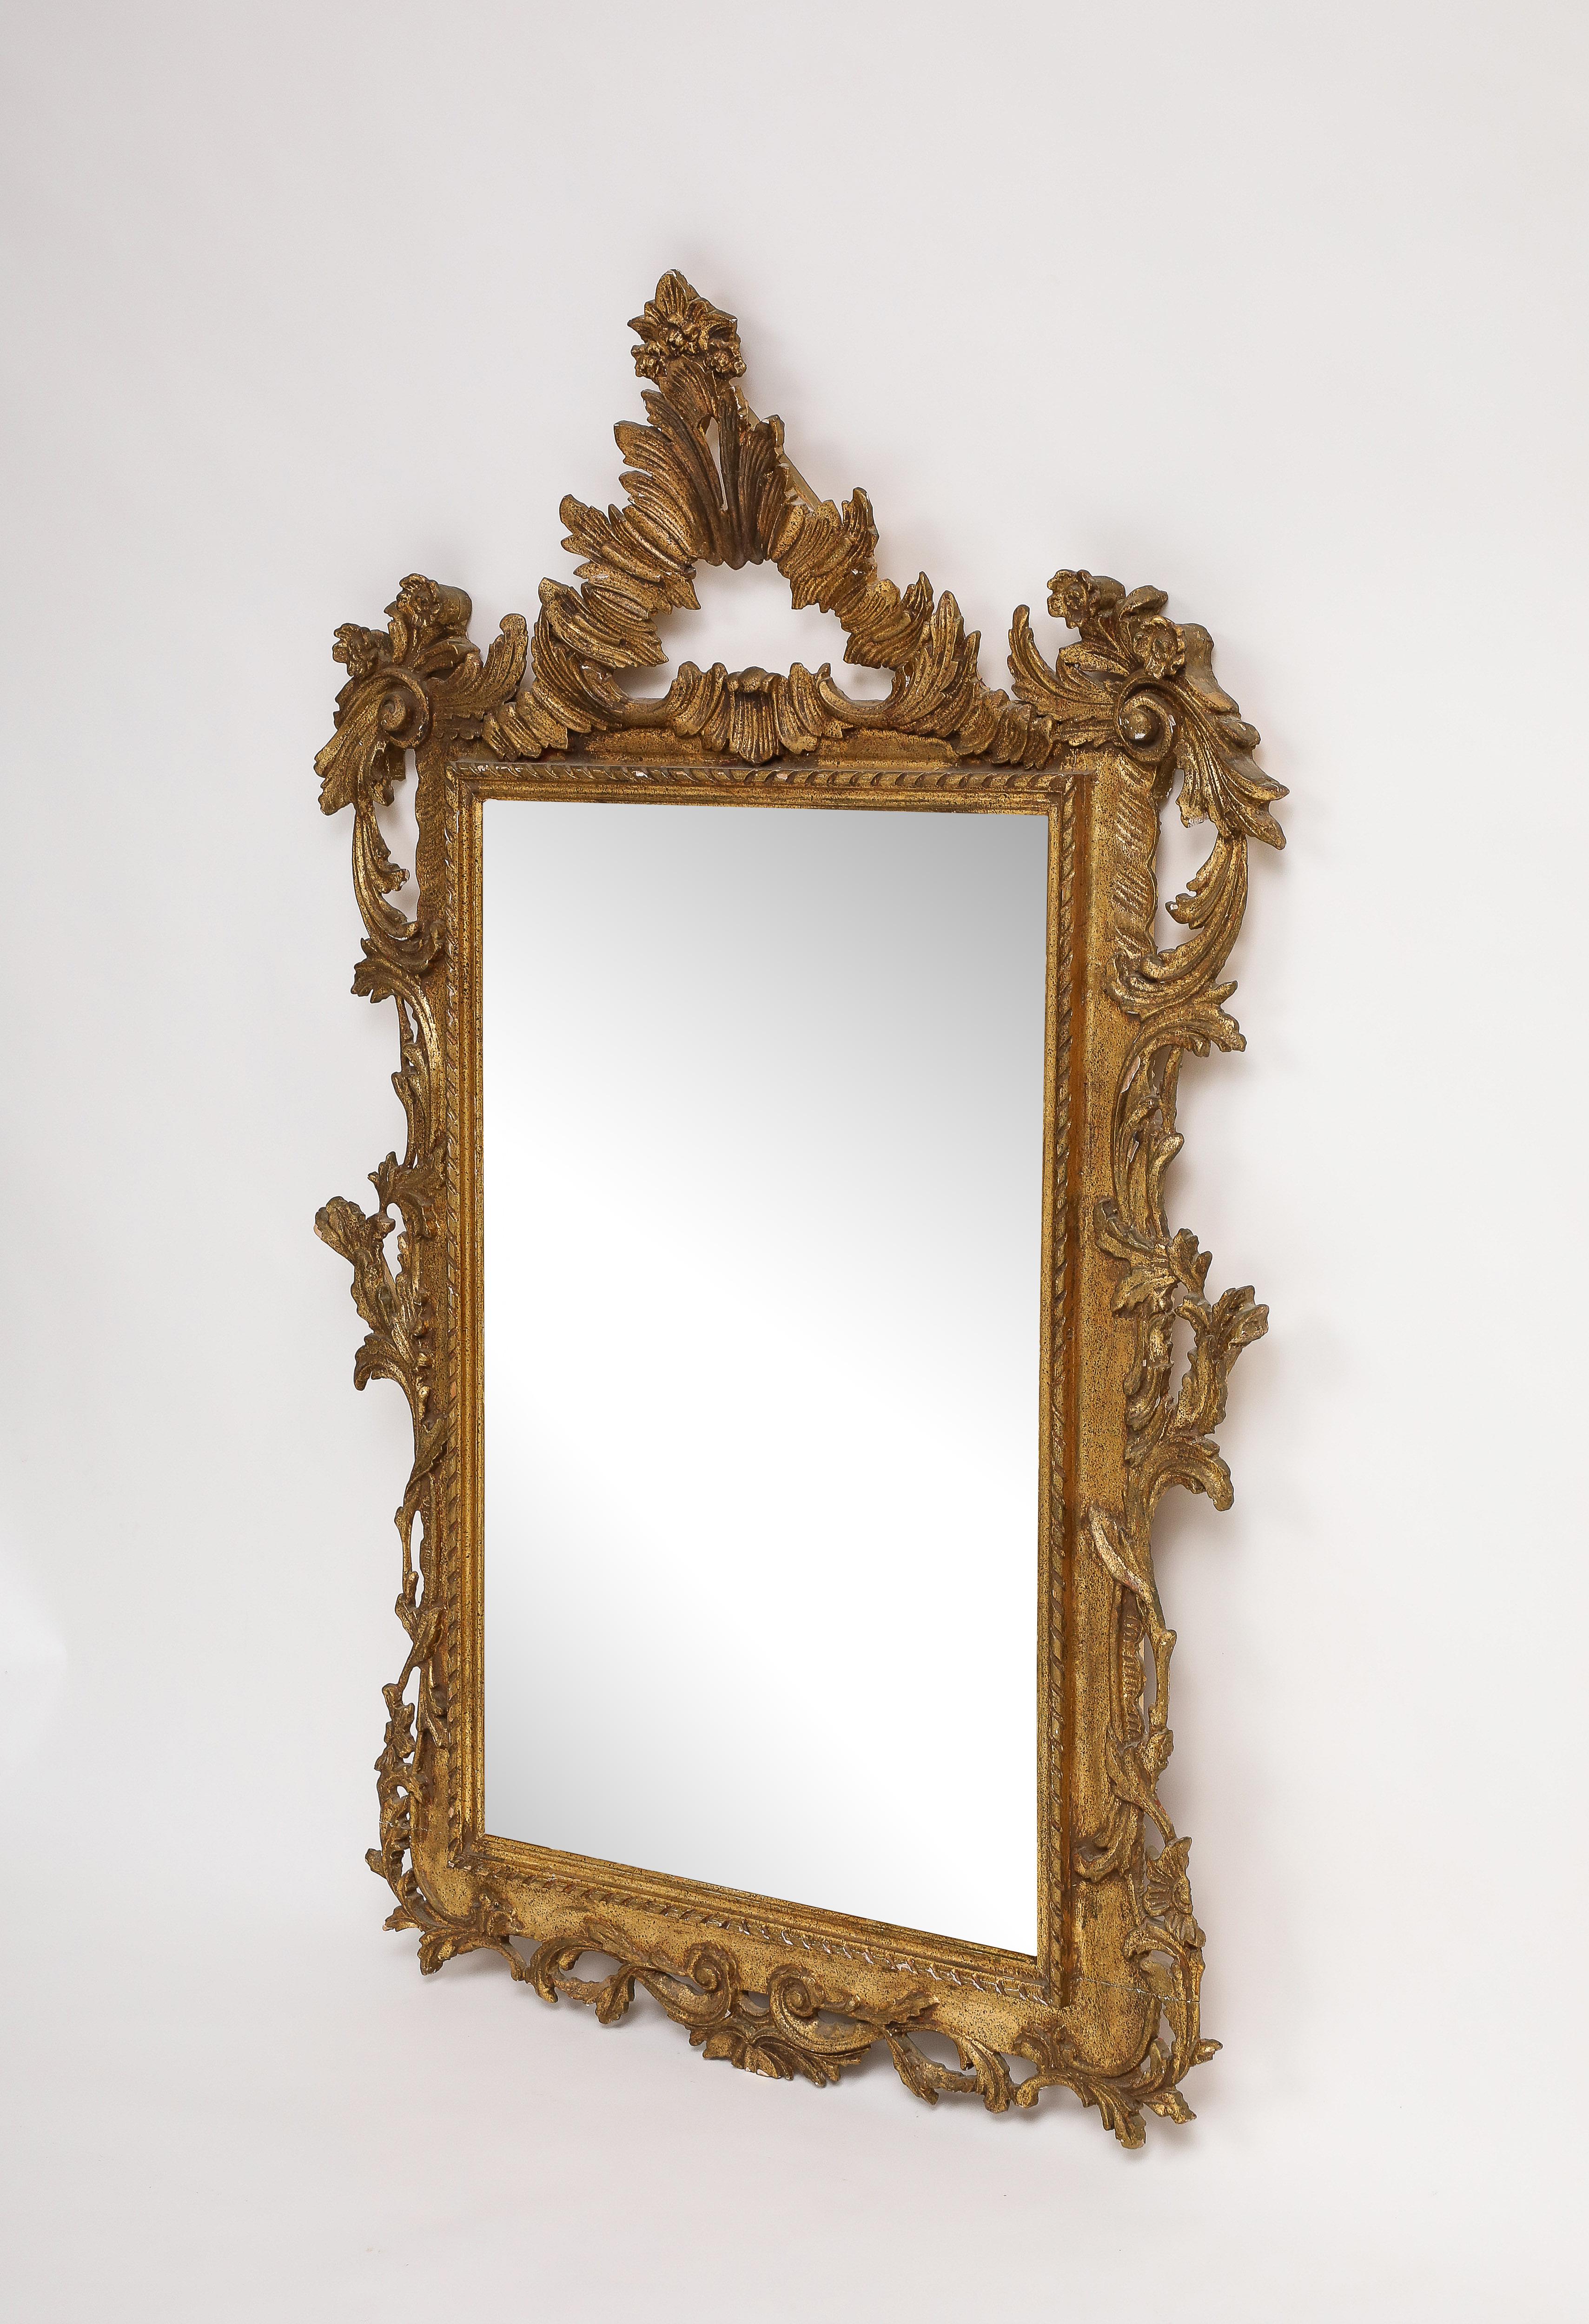 20th Century Midcentury Italian Carved Rococo Style Giltwood Mirror  For Sale